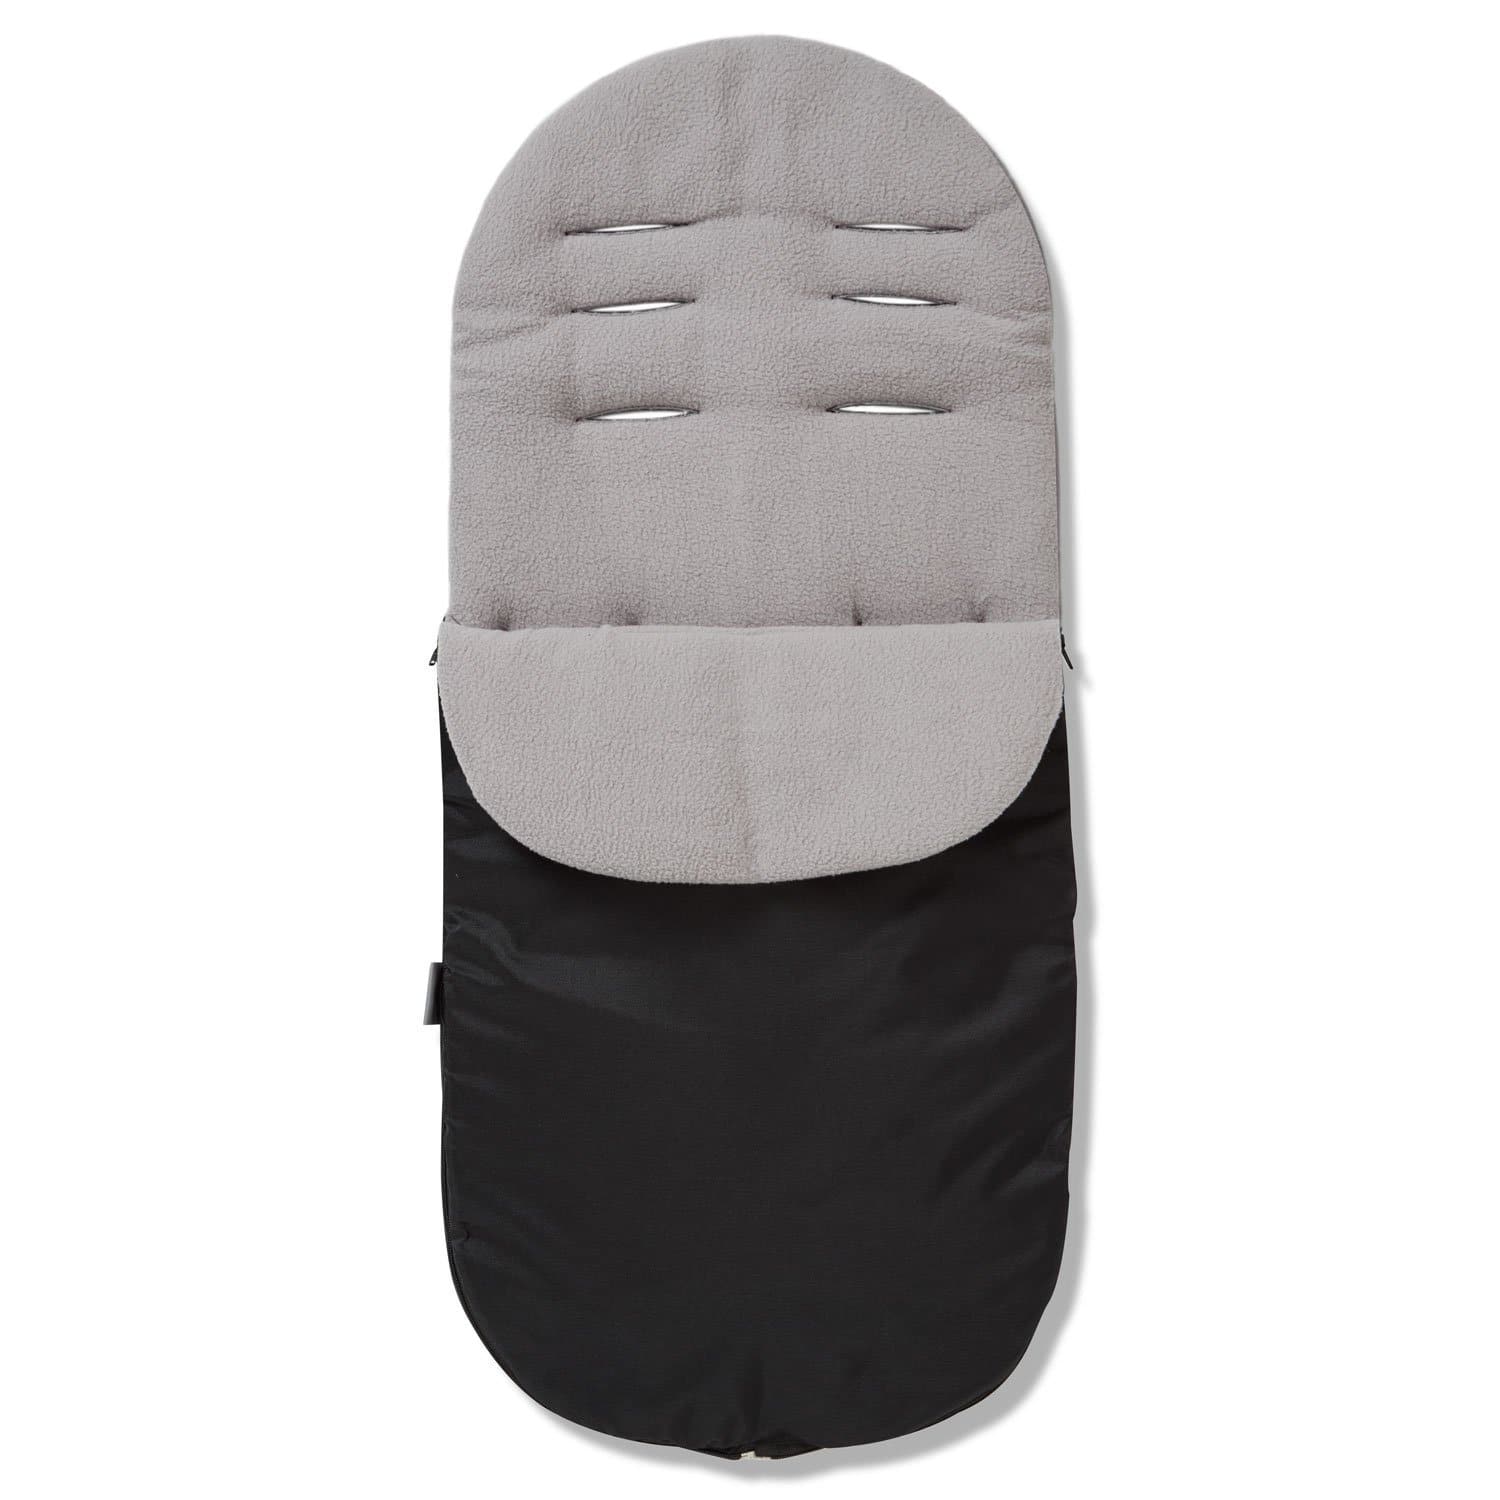 Footmuff / Cosy Toes Compatible with Diono - For Your Little One